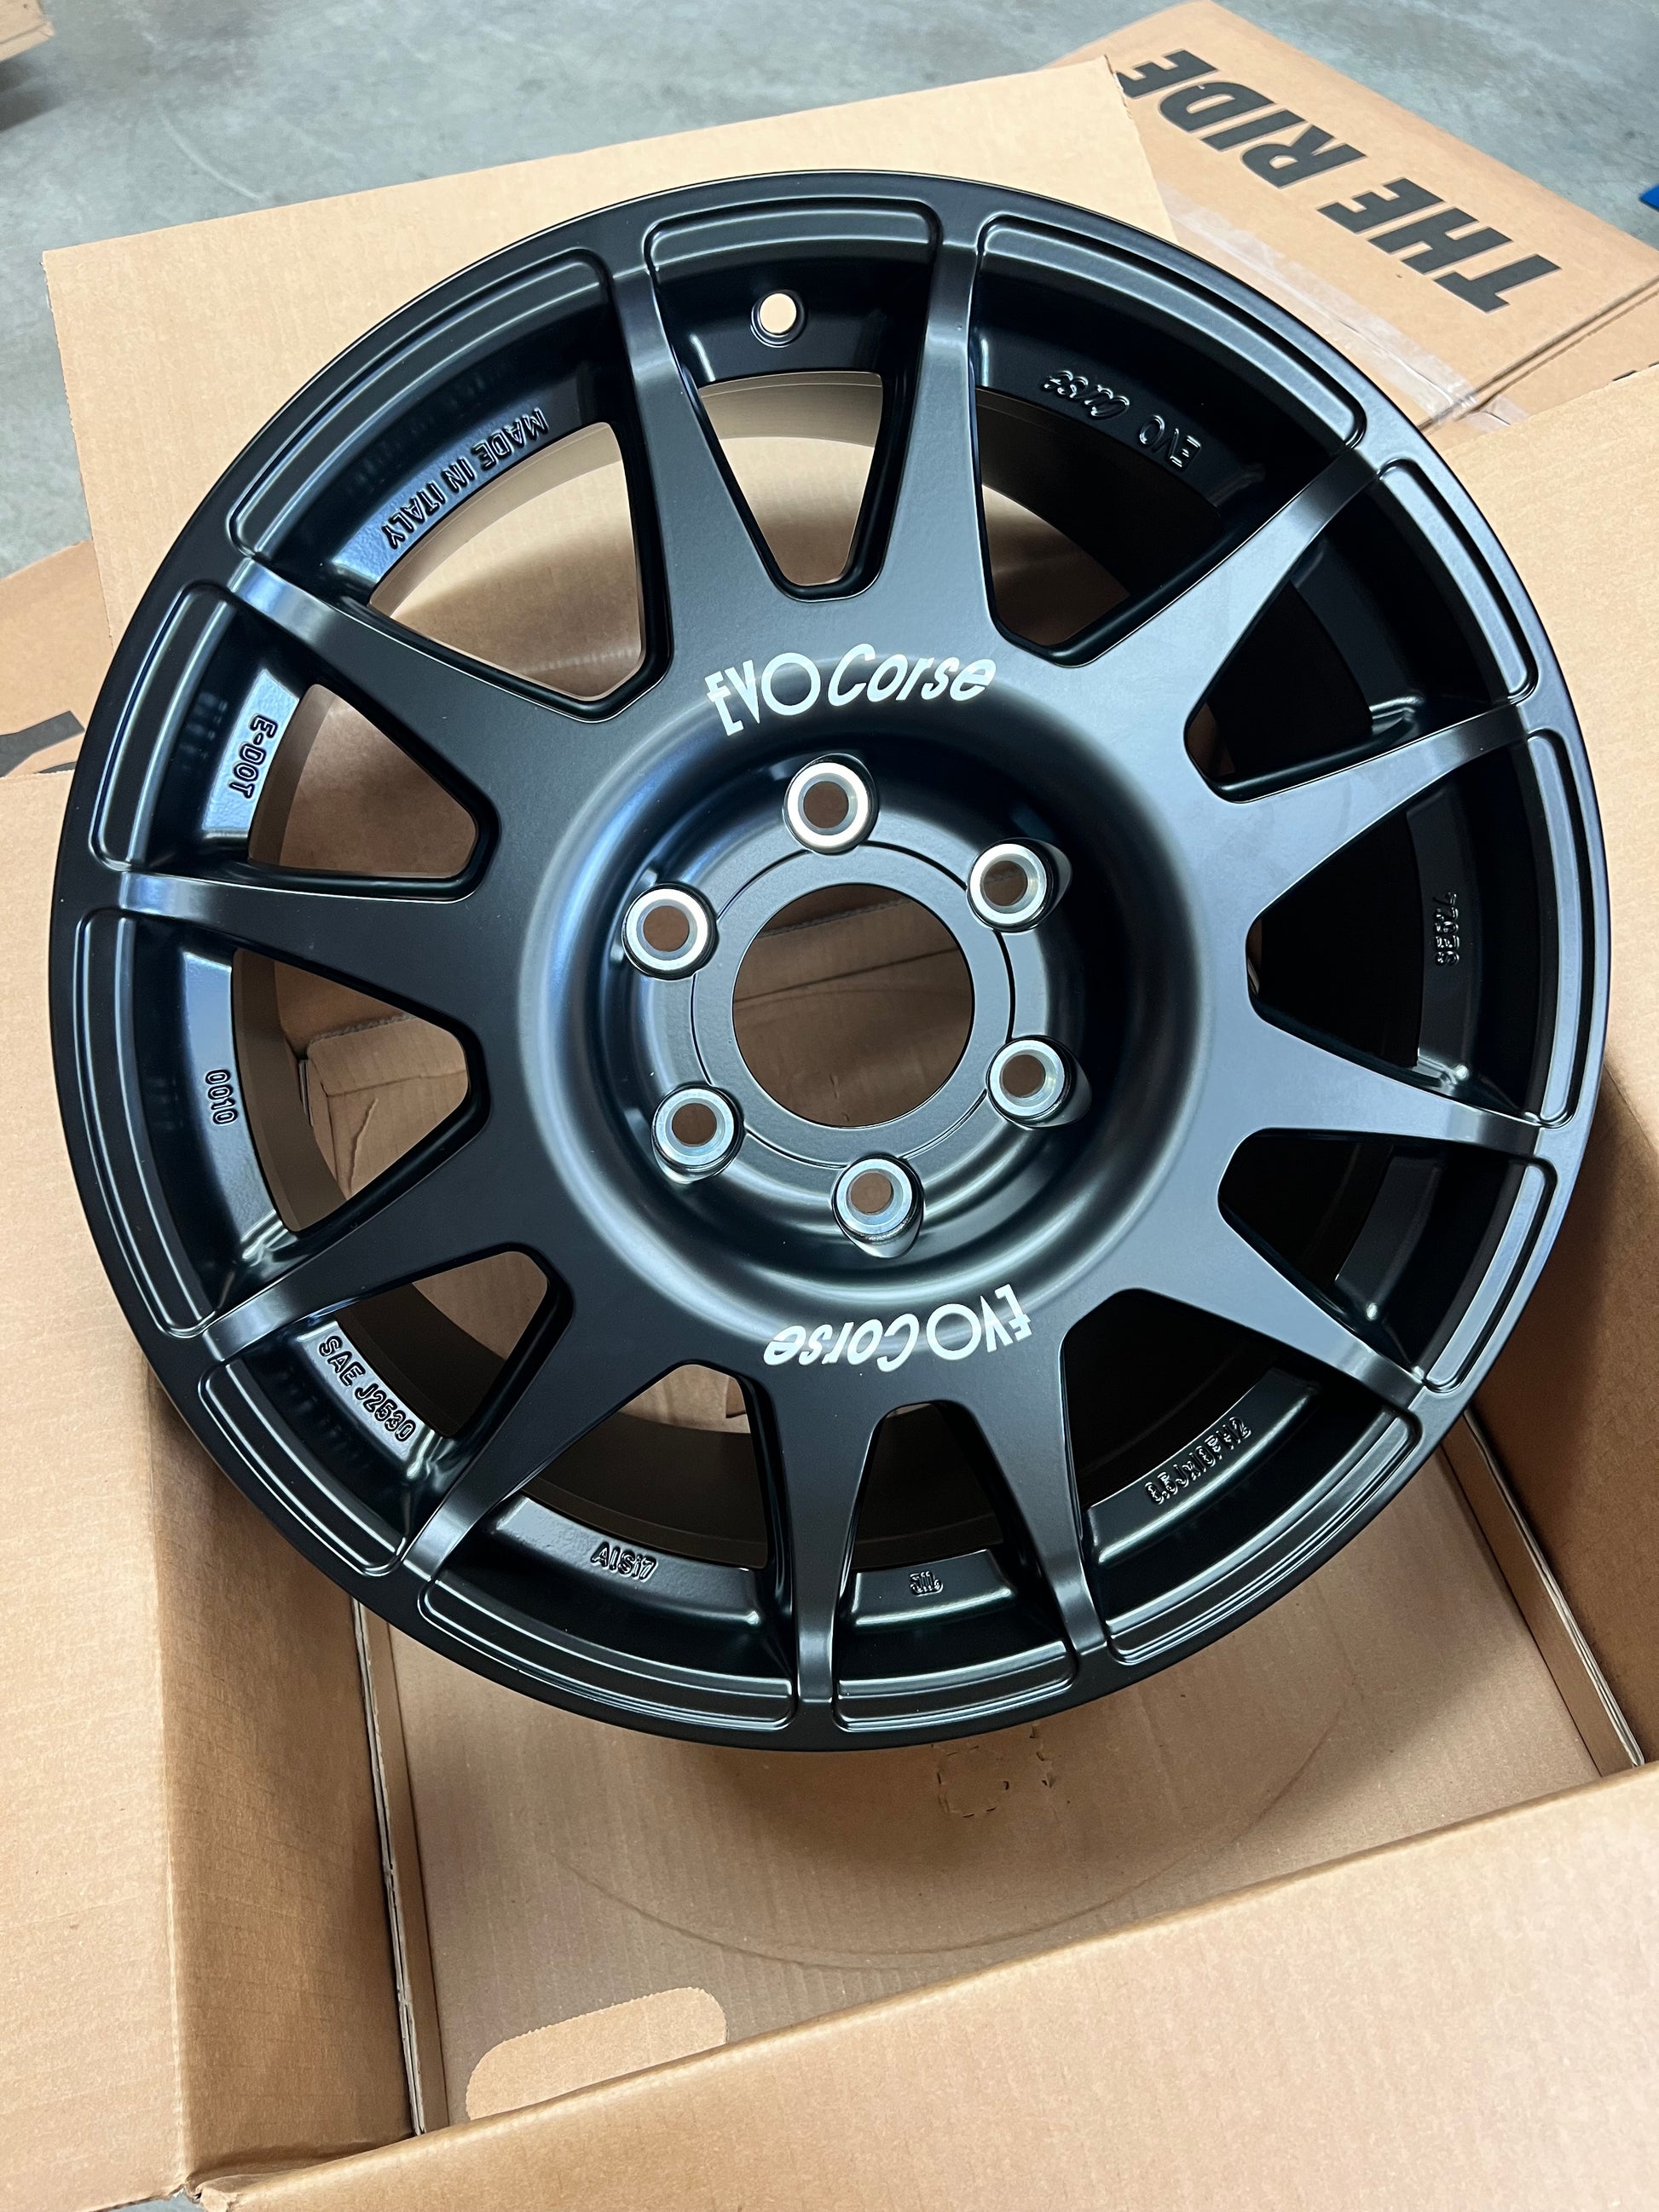 Ineos grenadier or J300 alloy wheel the offset that comes to the edge of the guard. Rally 18 x 8.5 with a positive 45 offset. Also, for land cruiser 300 series, with a 47 offset. Best wheel for all terrain tyres. Like BFGoodrich of Falken 275 65 r18. High strength for GVM upgrade. Evo Corse, made in Italy. Pictured here in box from Overlanders, Matt black colour.